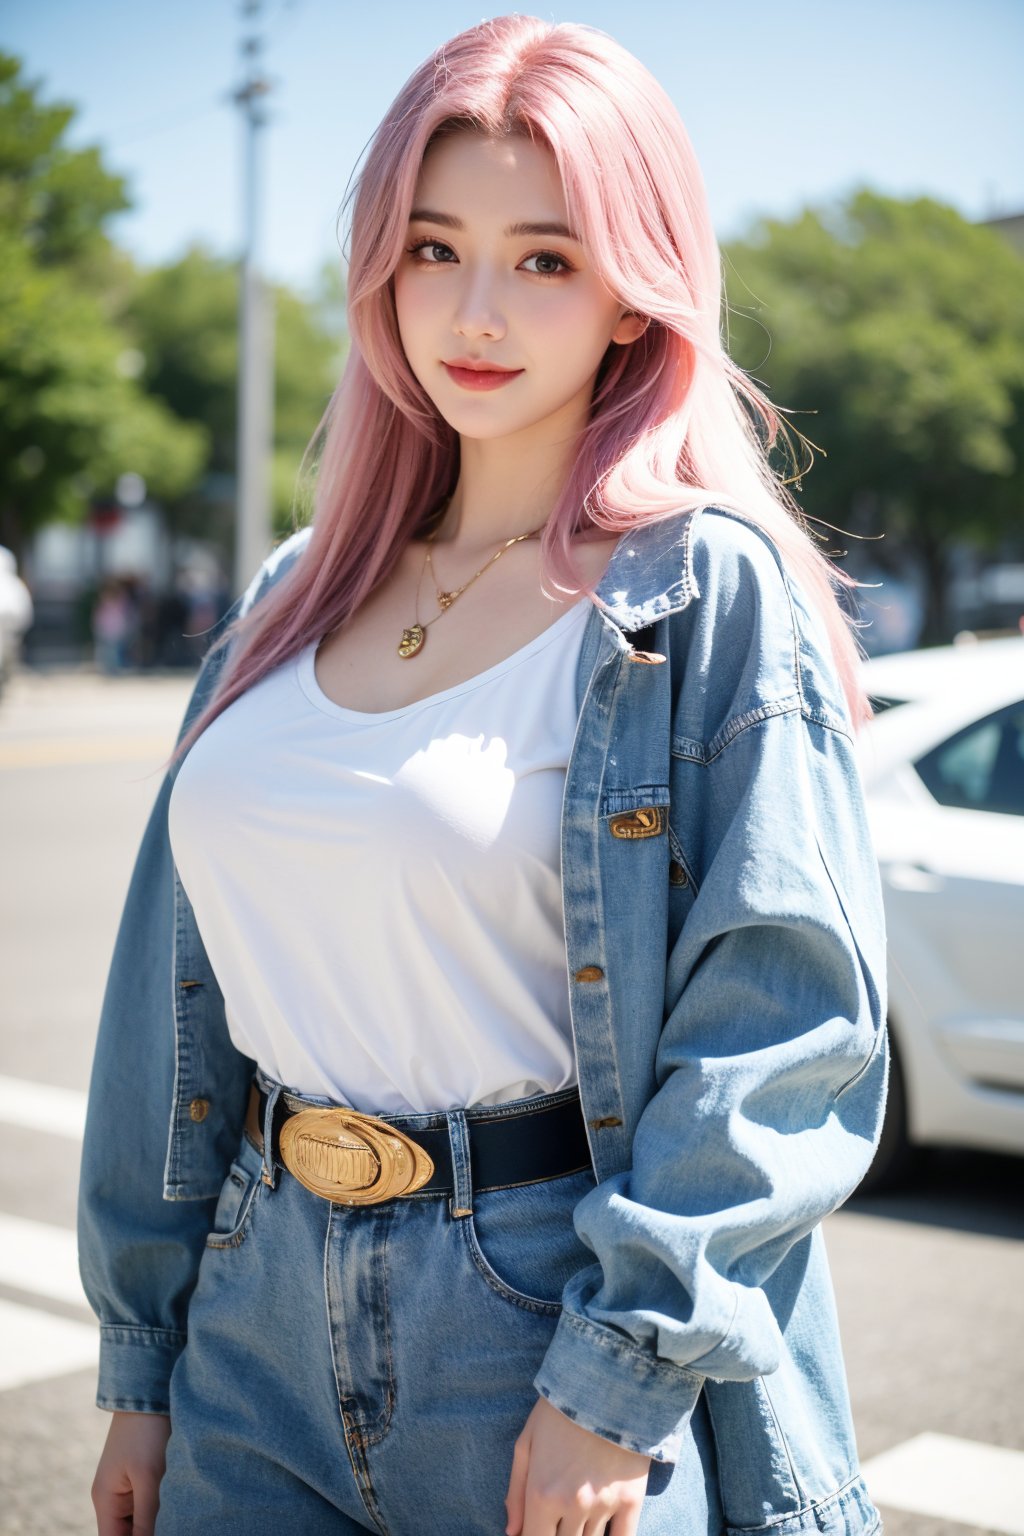 A young woman with vibrant pink hair and long locks framing her heart-shaped face. She gazes directly at the viewer, a warm smile spreading across her closed-mouthed lips. Her green eyes sparkle as she wears a white shirt with a jacket open to reveal a belt and necklace. A bag slung over her shoulder, she stands confidently, her denim jacket worn over a blue one, creating a sense of depth and texture in the blurred background.,Xyunxiao,(big breasts:1.39),